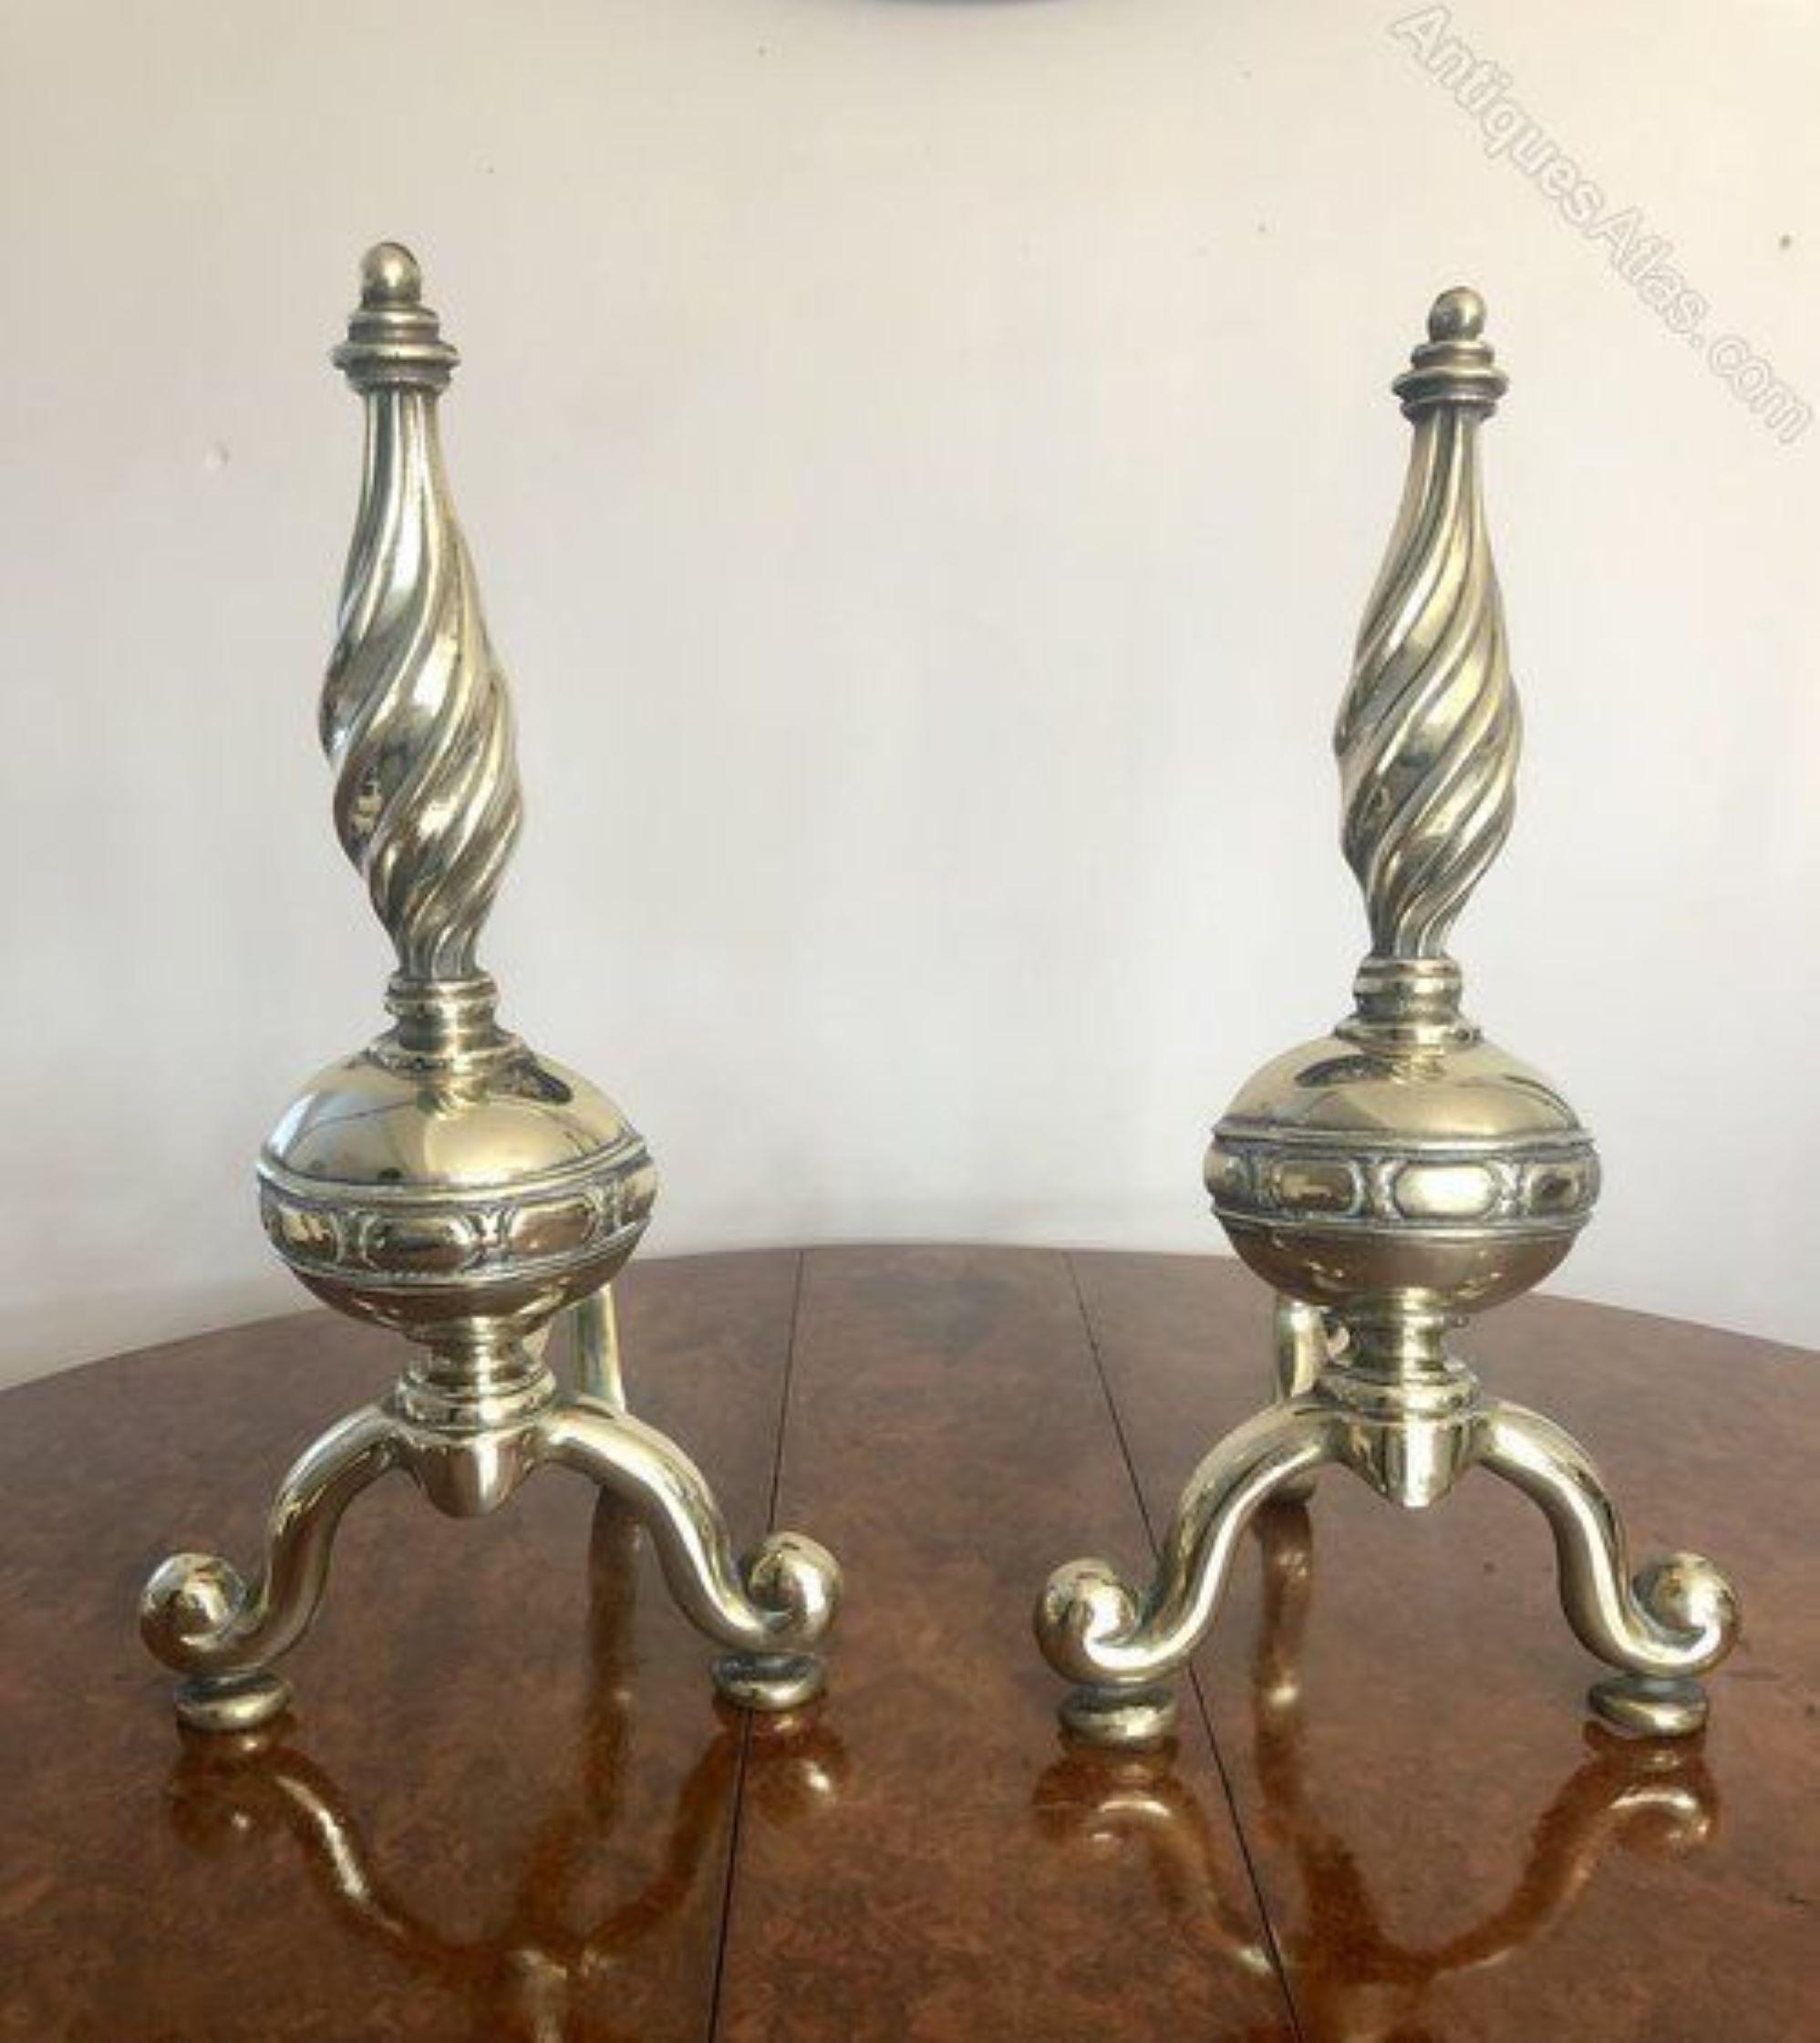 Brass Outstanding Quality Antique Victorian Fire Dogs For Sale